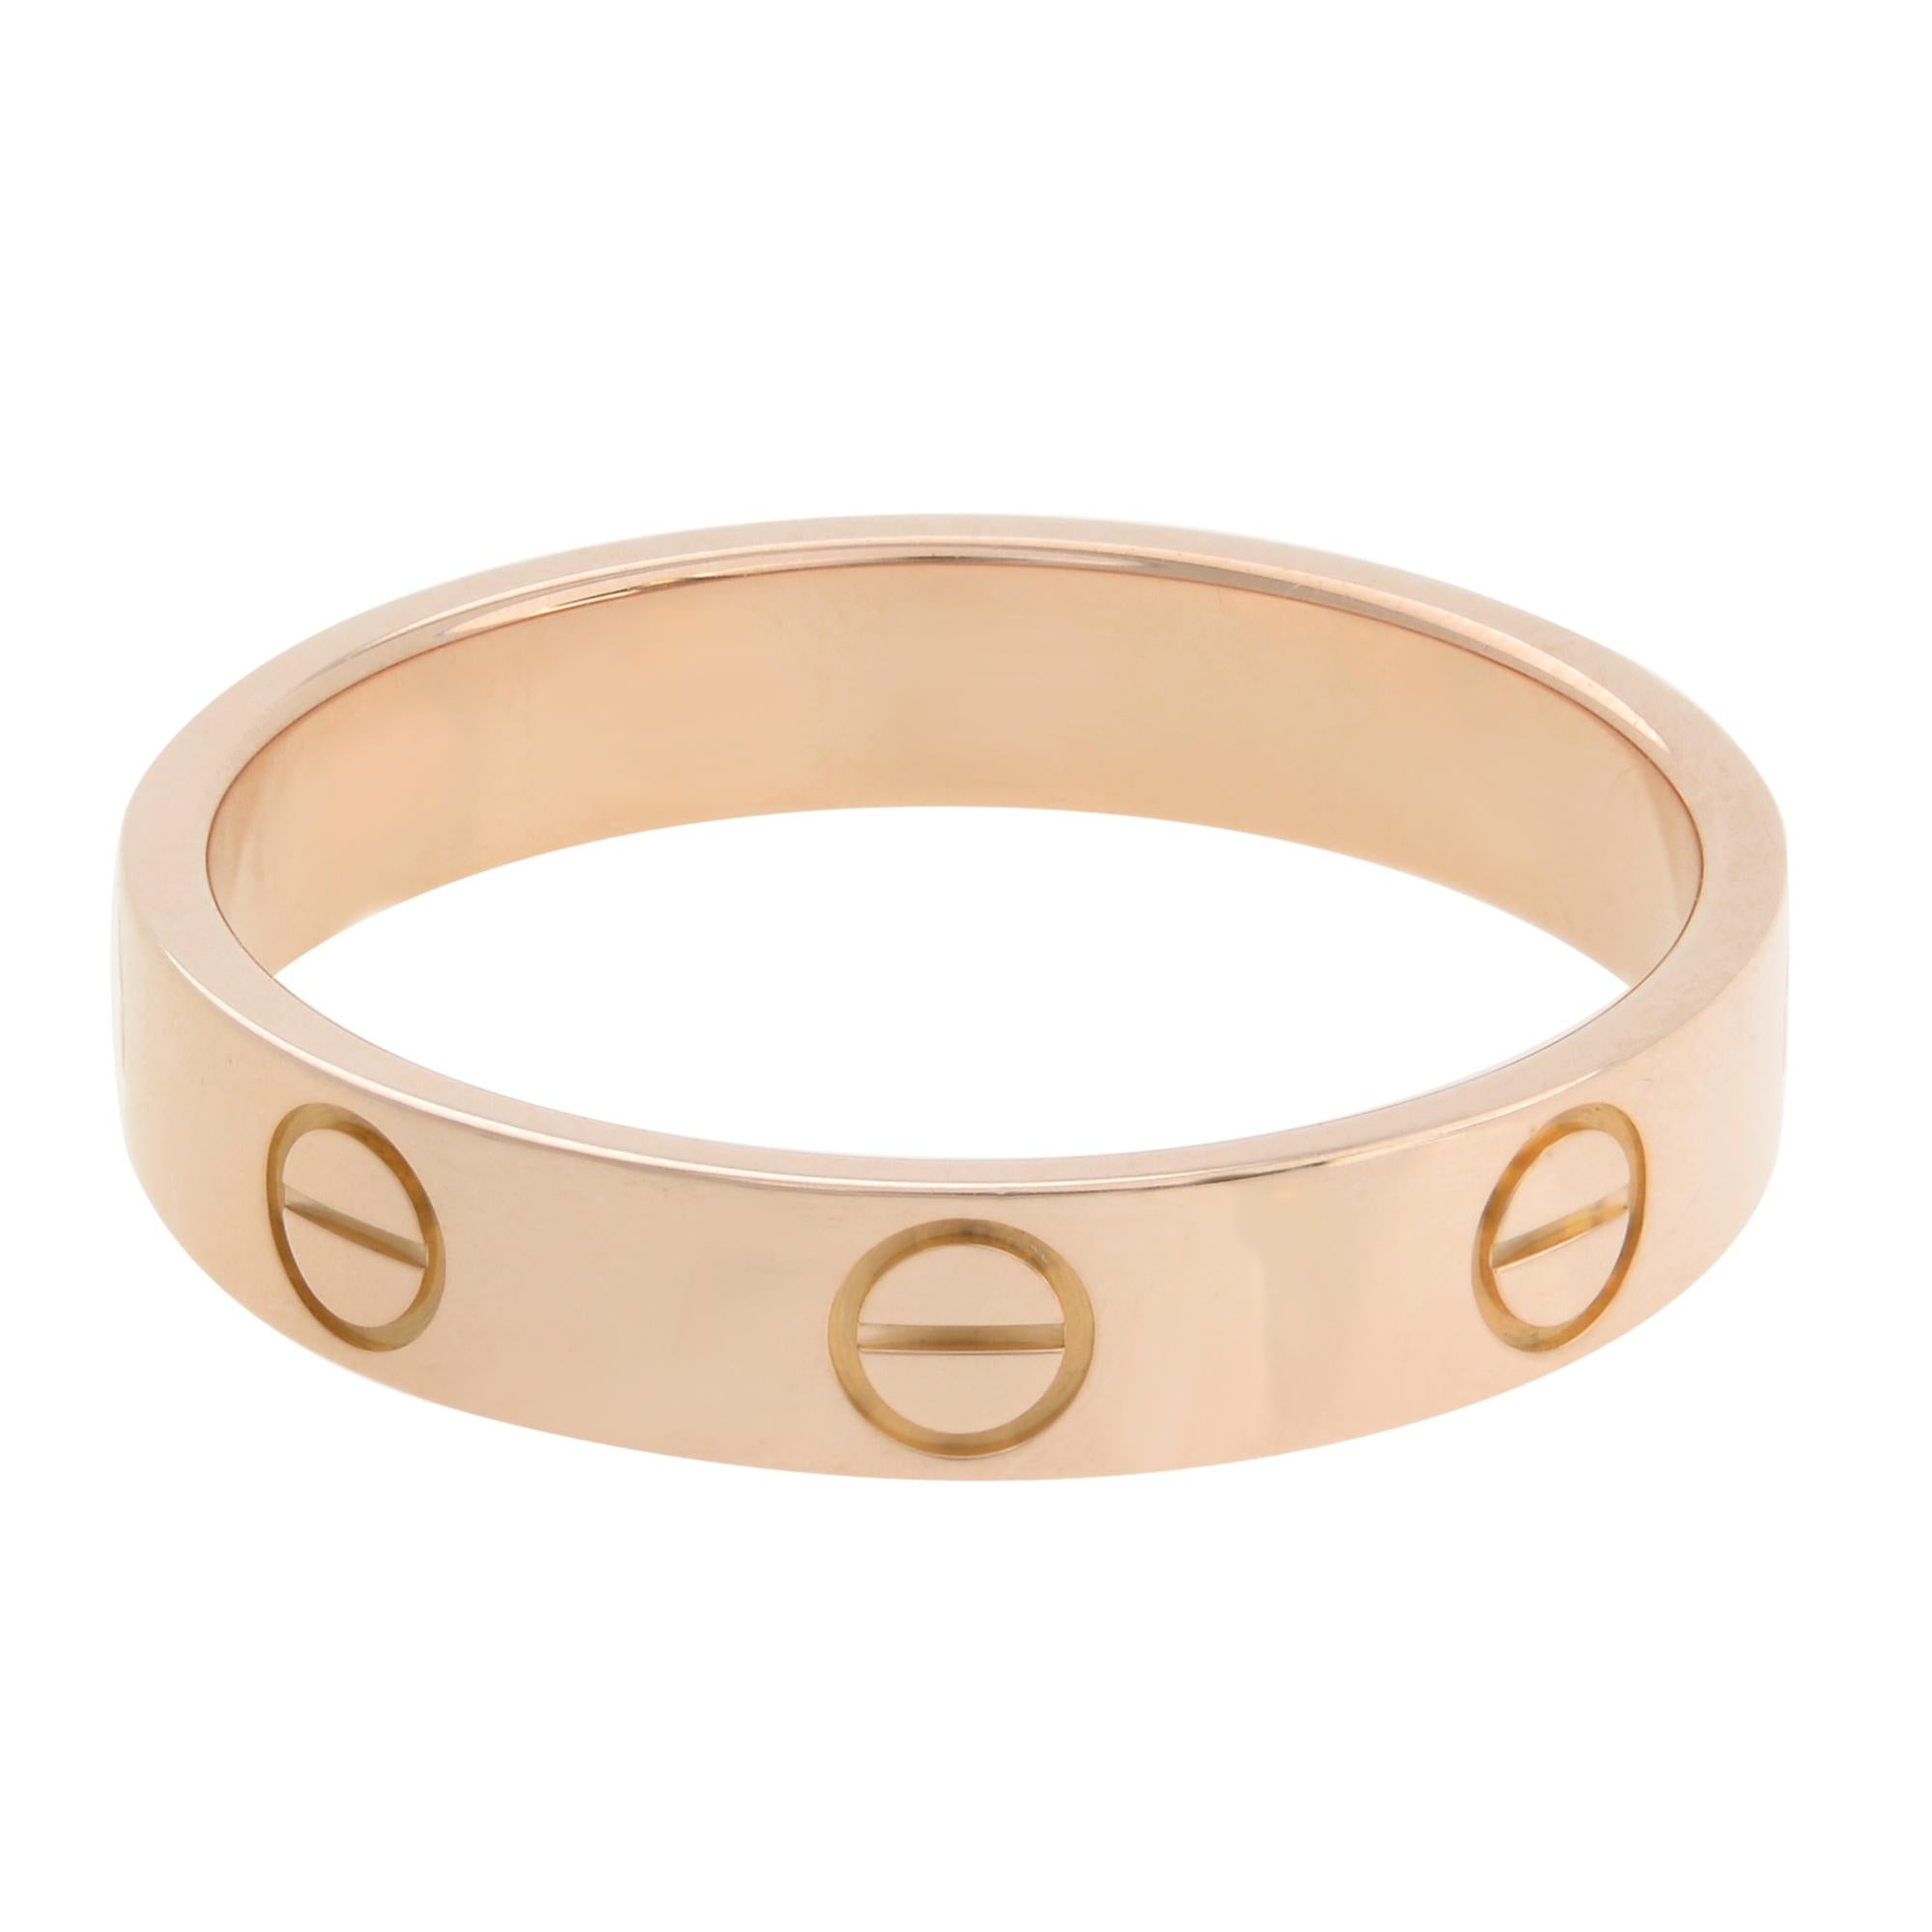 Cartier Love wedding band in 18K rose gold. Small model Love ring. Width: 3.6mm. Ring size 55 US 6.75. Excellent pre-owned condition. Comes with box. Papers are not included.